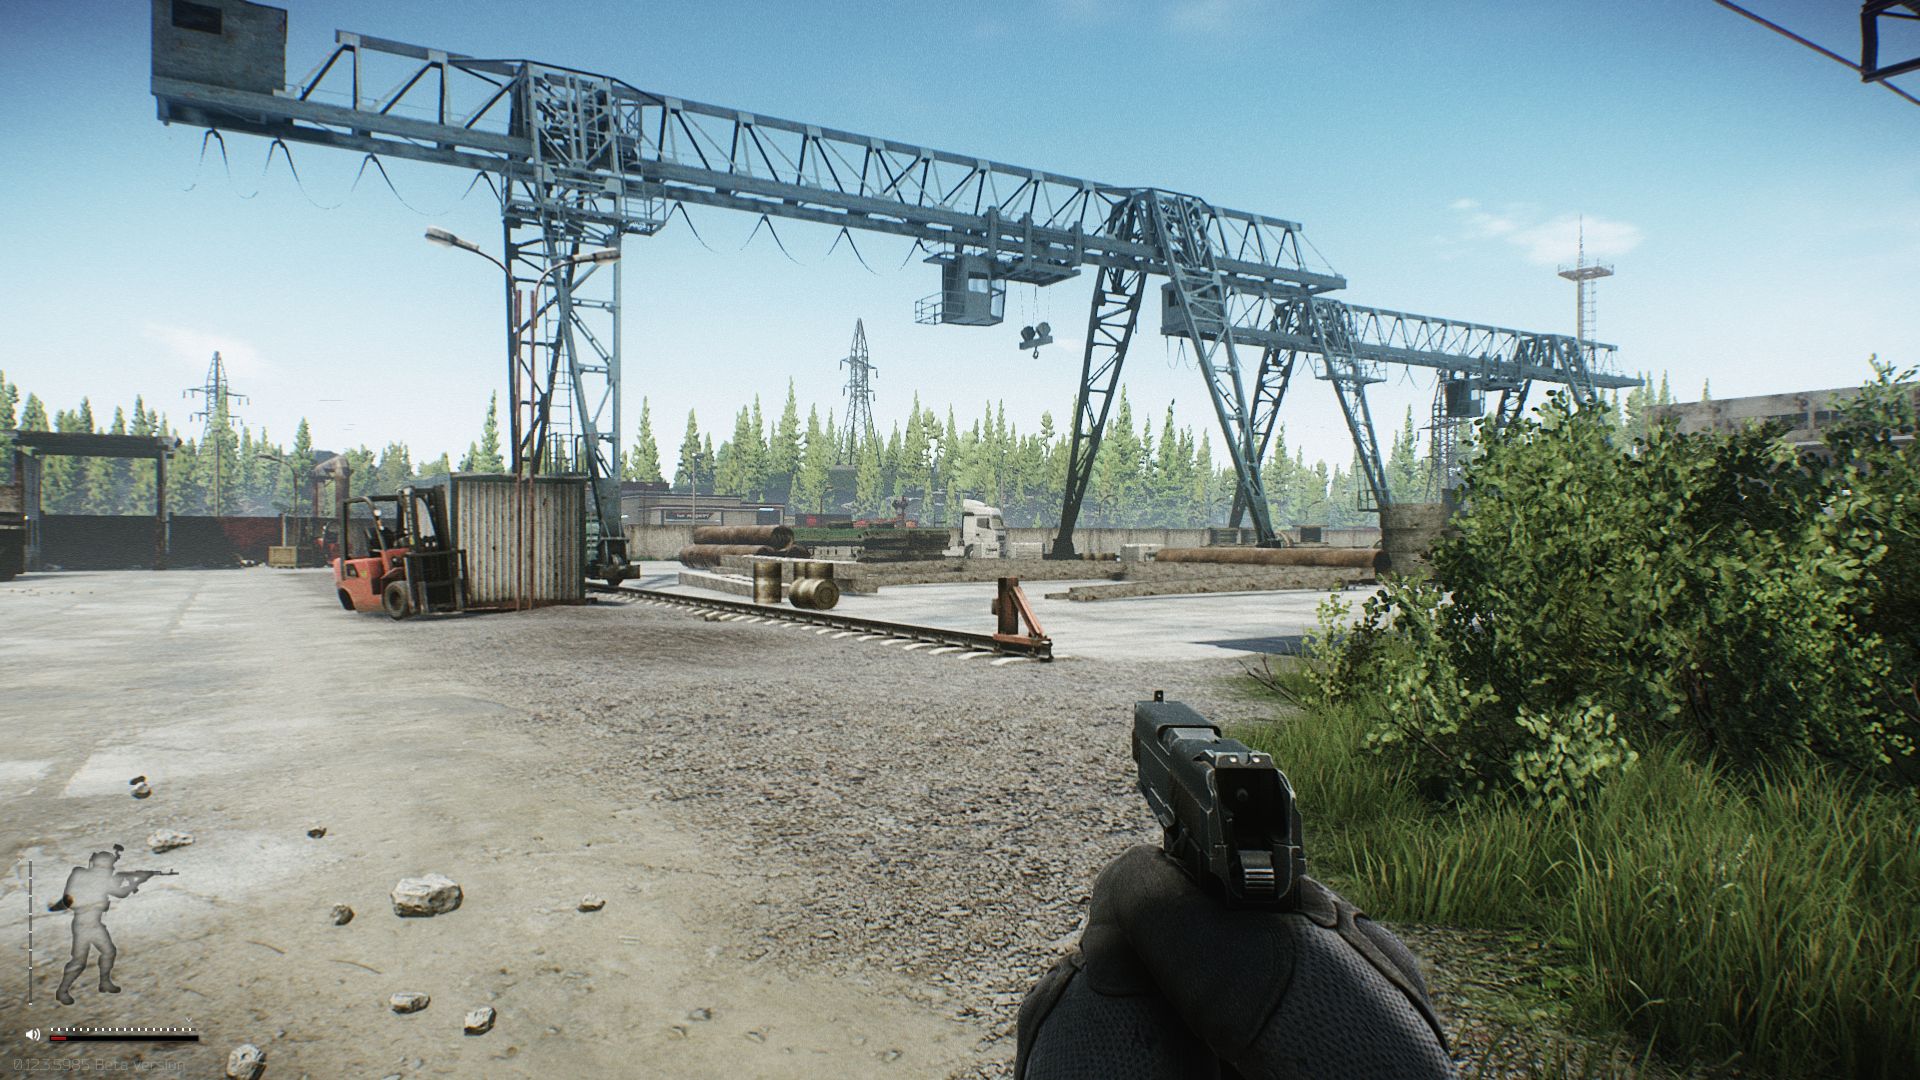 Different types of game modes available in the game of Escape from Tarkov